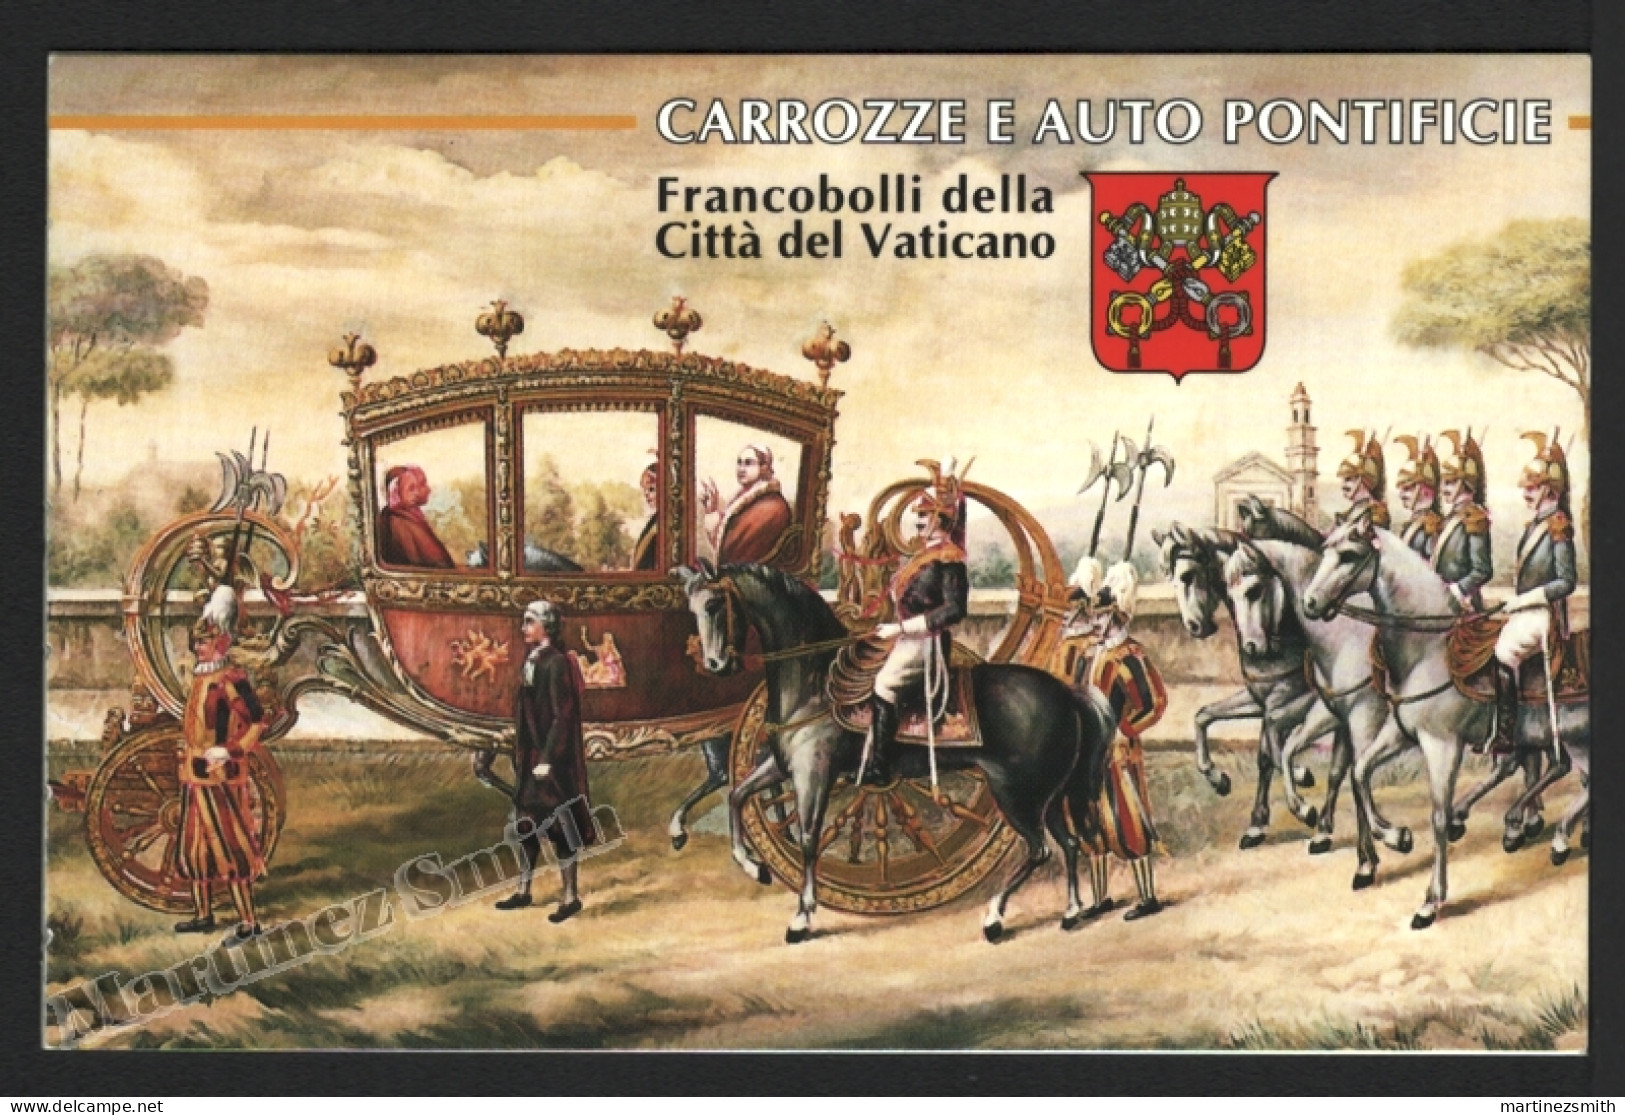 Vatican 1997 Yv. C1059, Papal Carriages & Cars, Vatican Museum - Booklet - MNH - Carnets